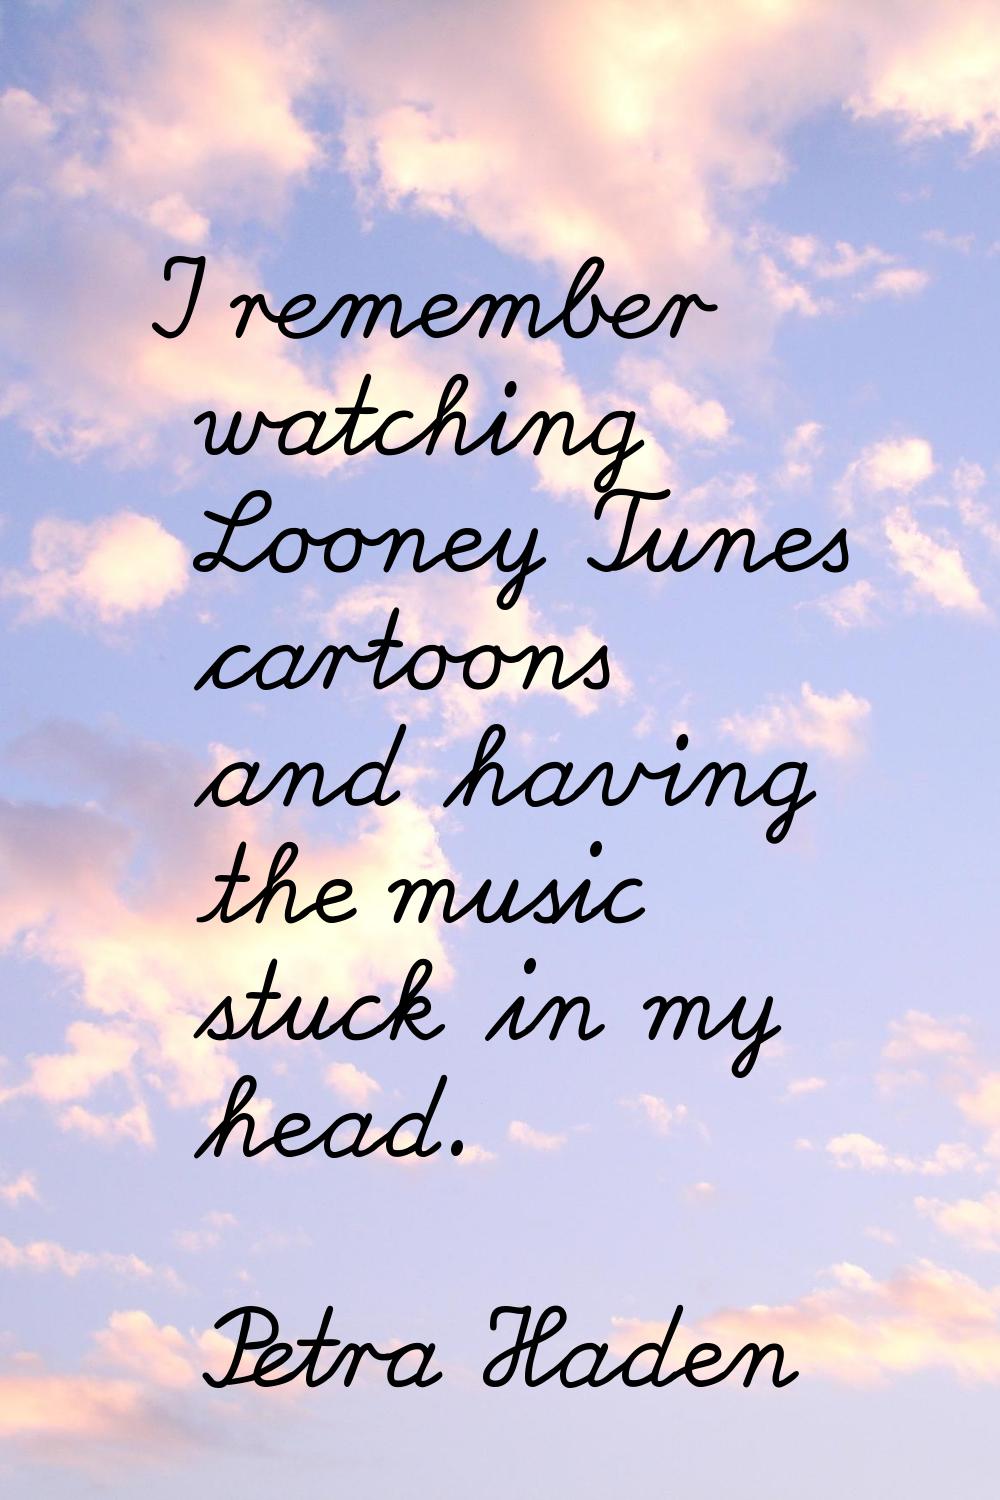 I remember watching Looney Tunes cartoons and having the music stuck in my head.